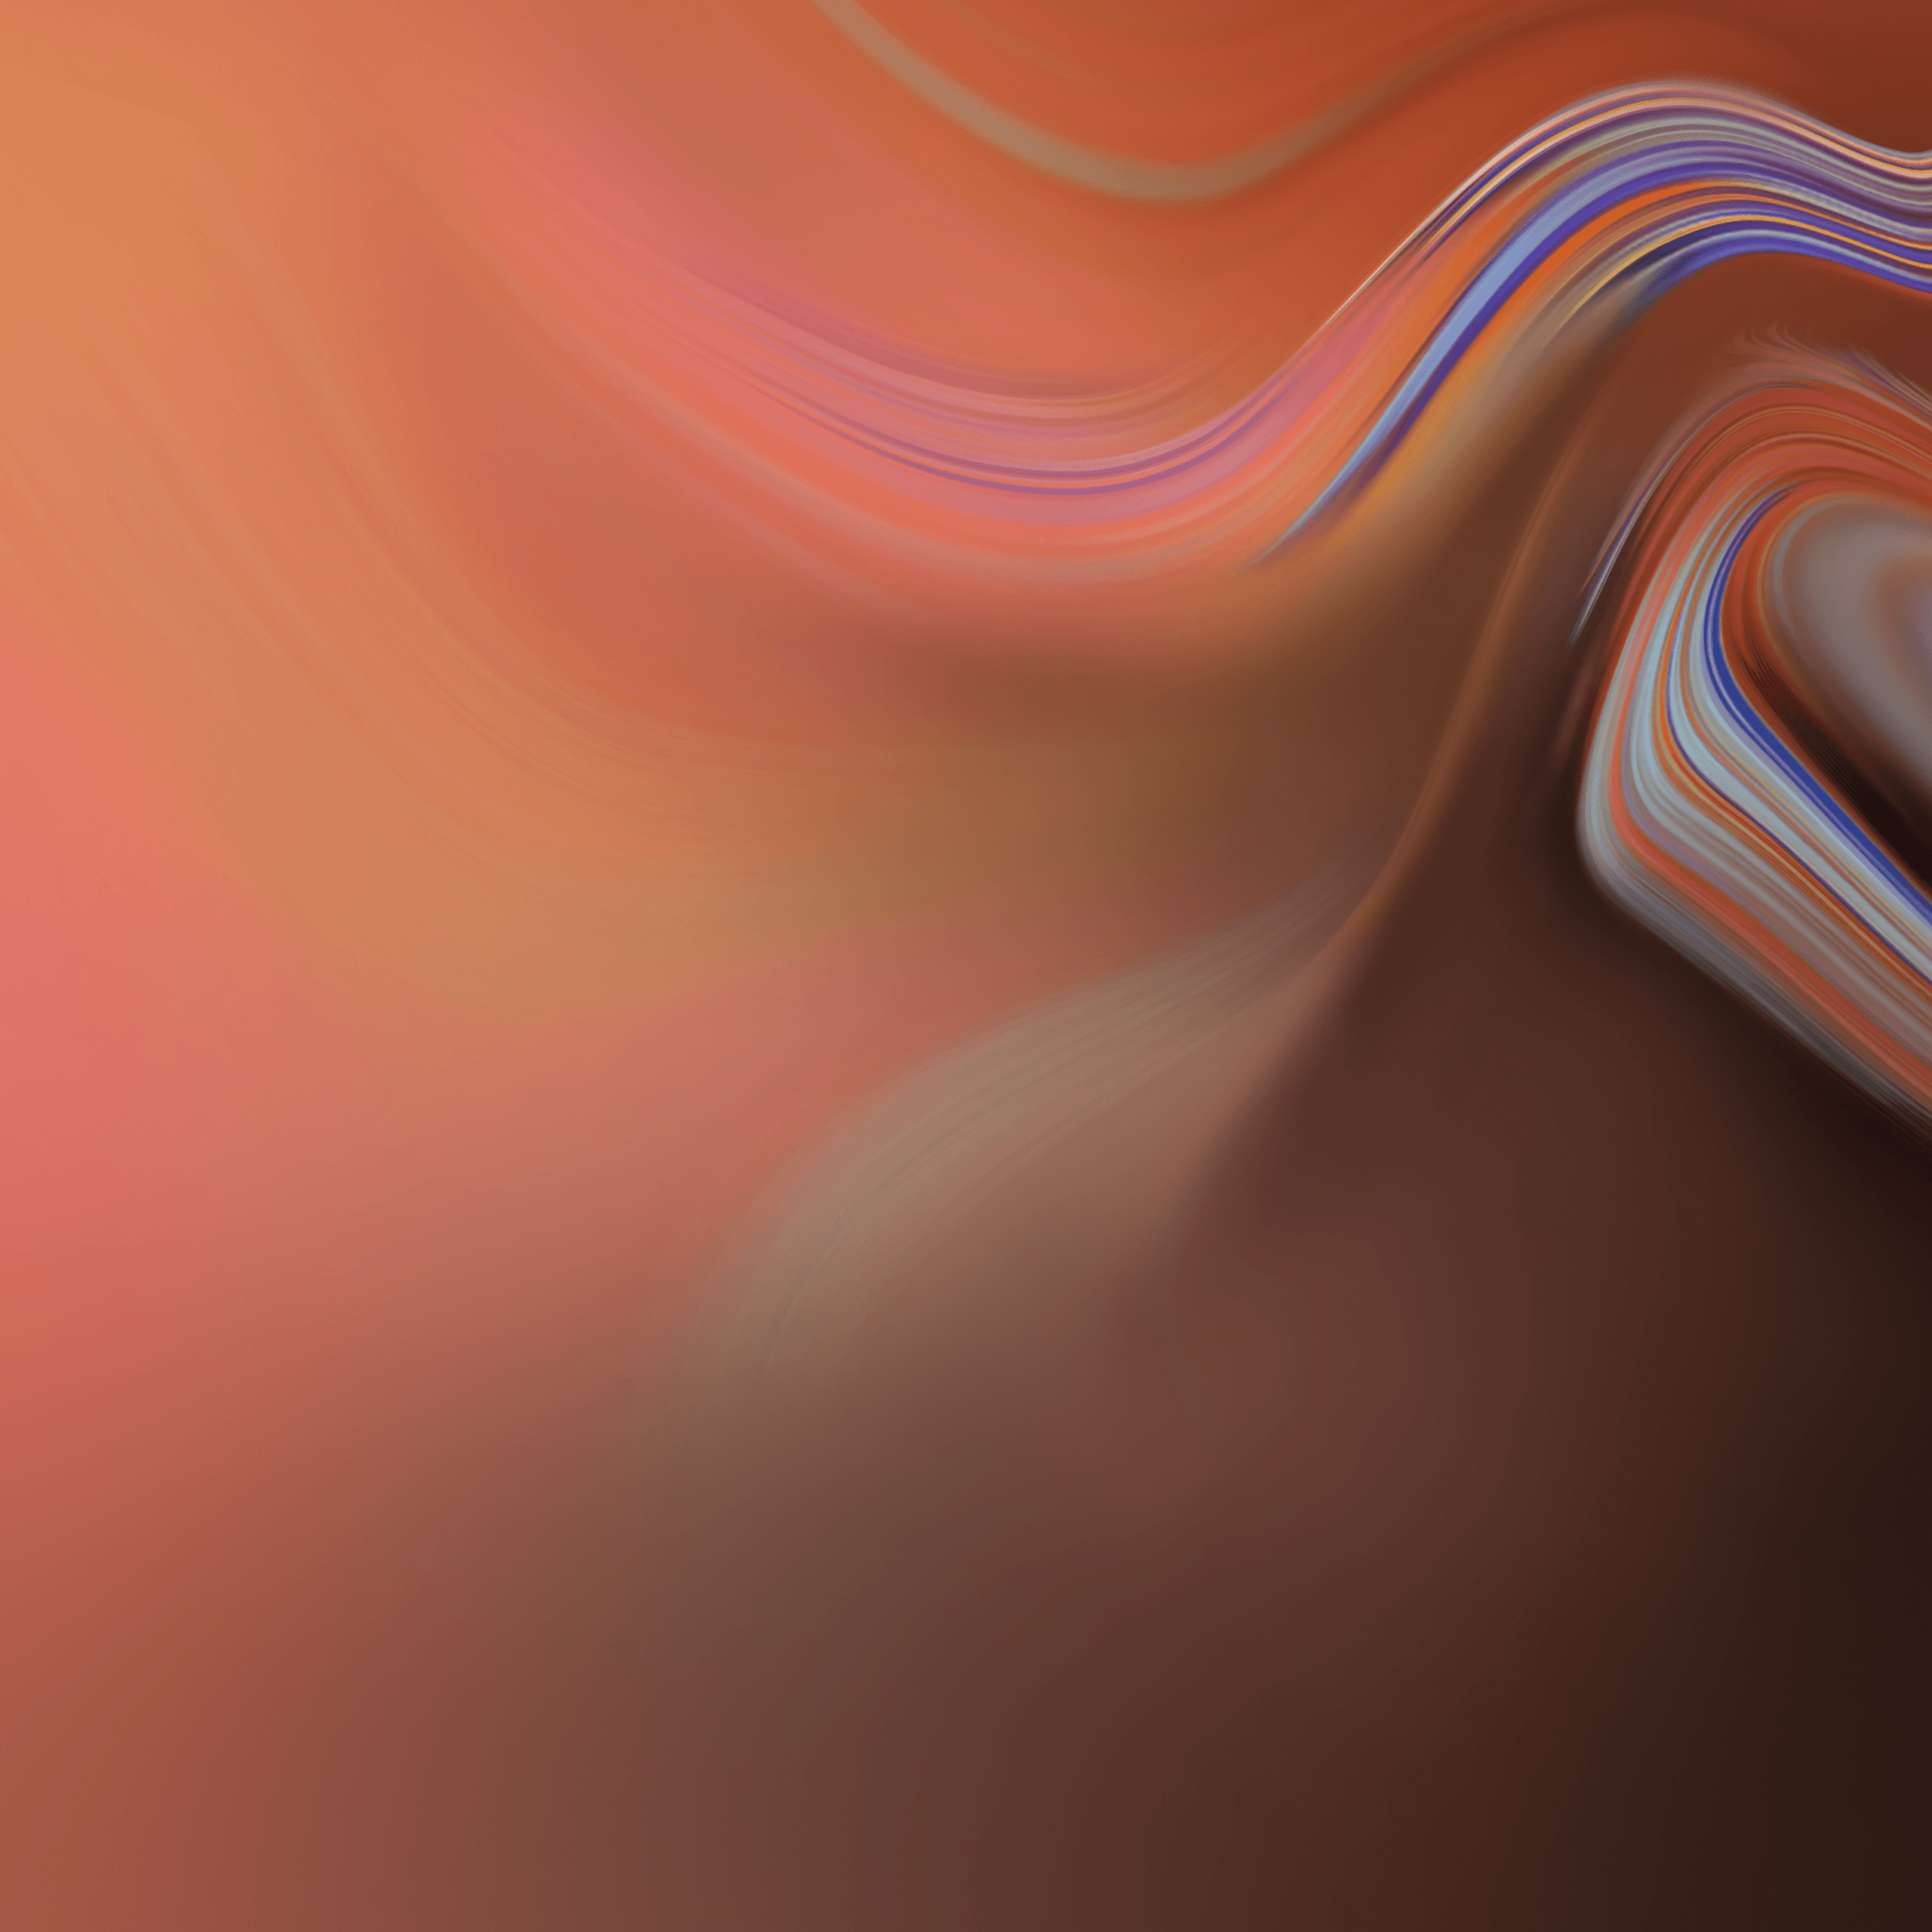 Galaxy Tab S4 wallpaper are here for your viewing pleasure